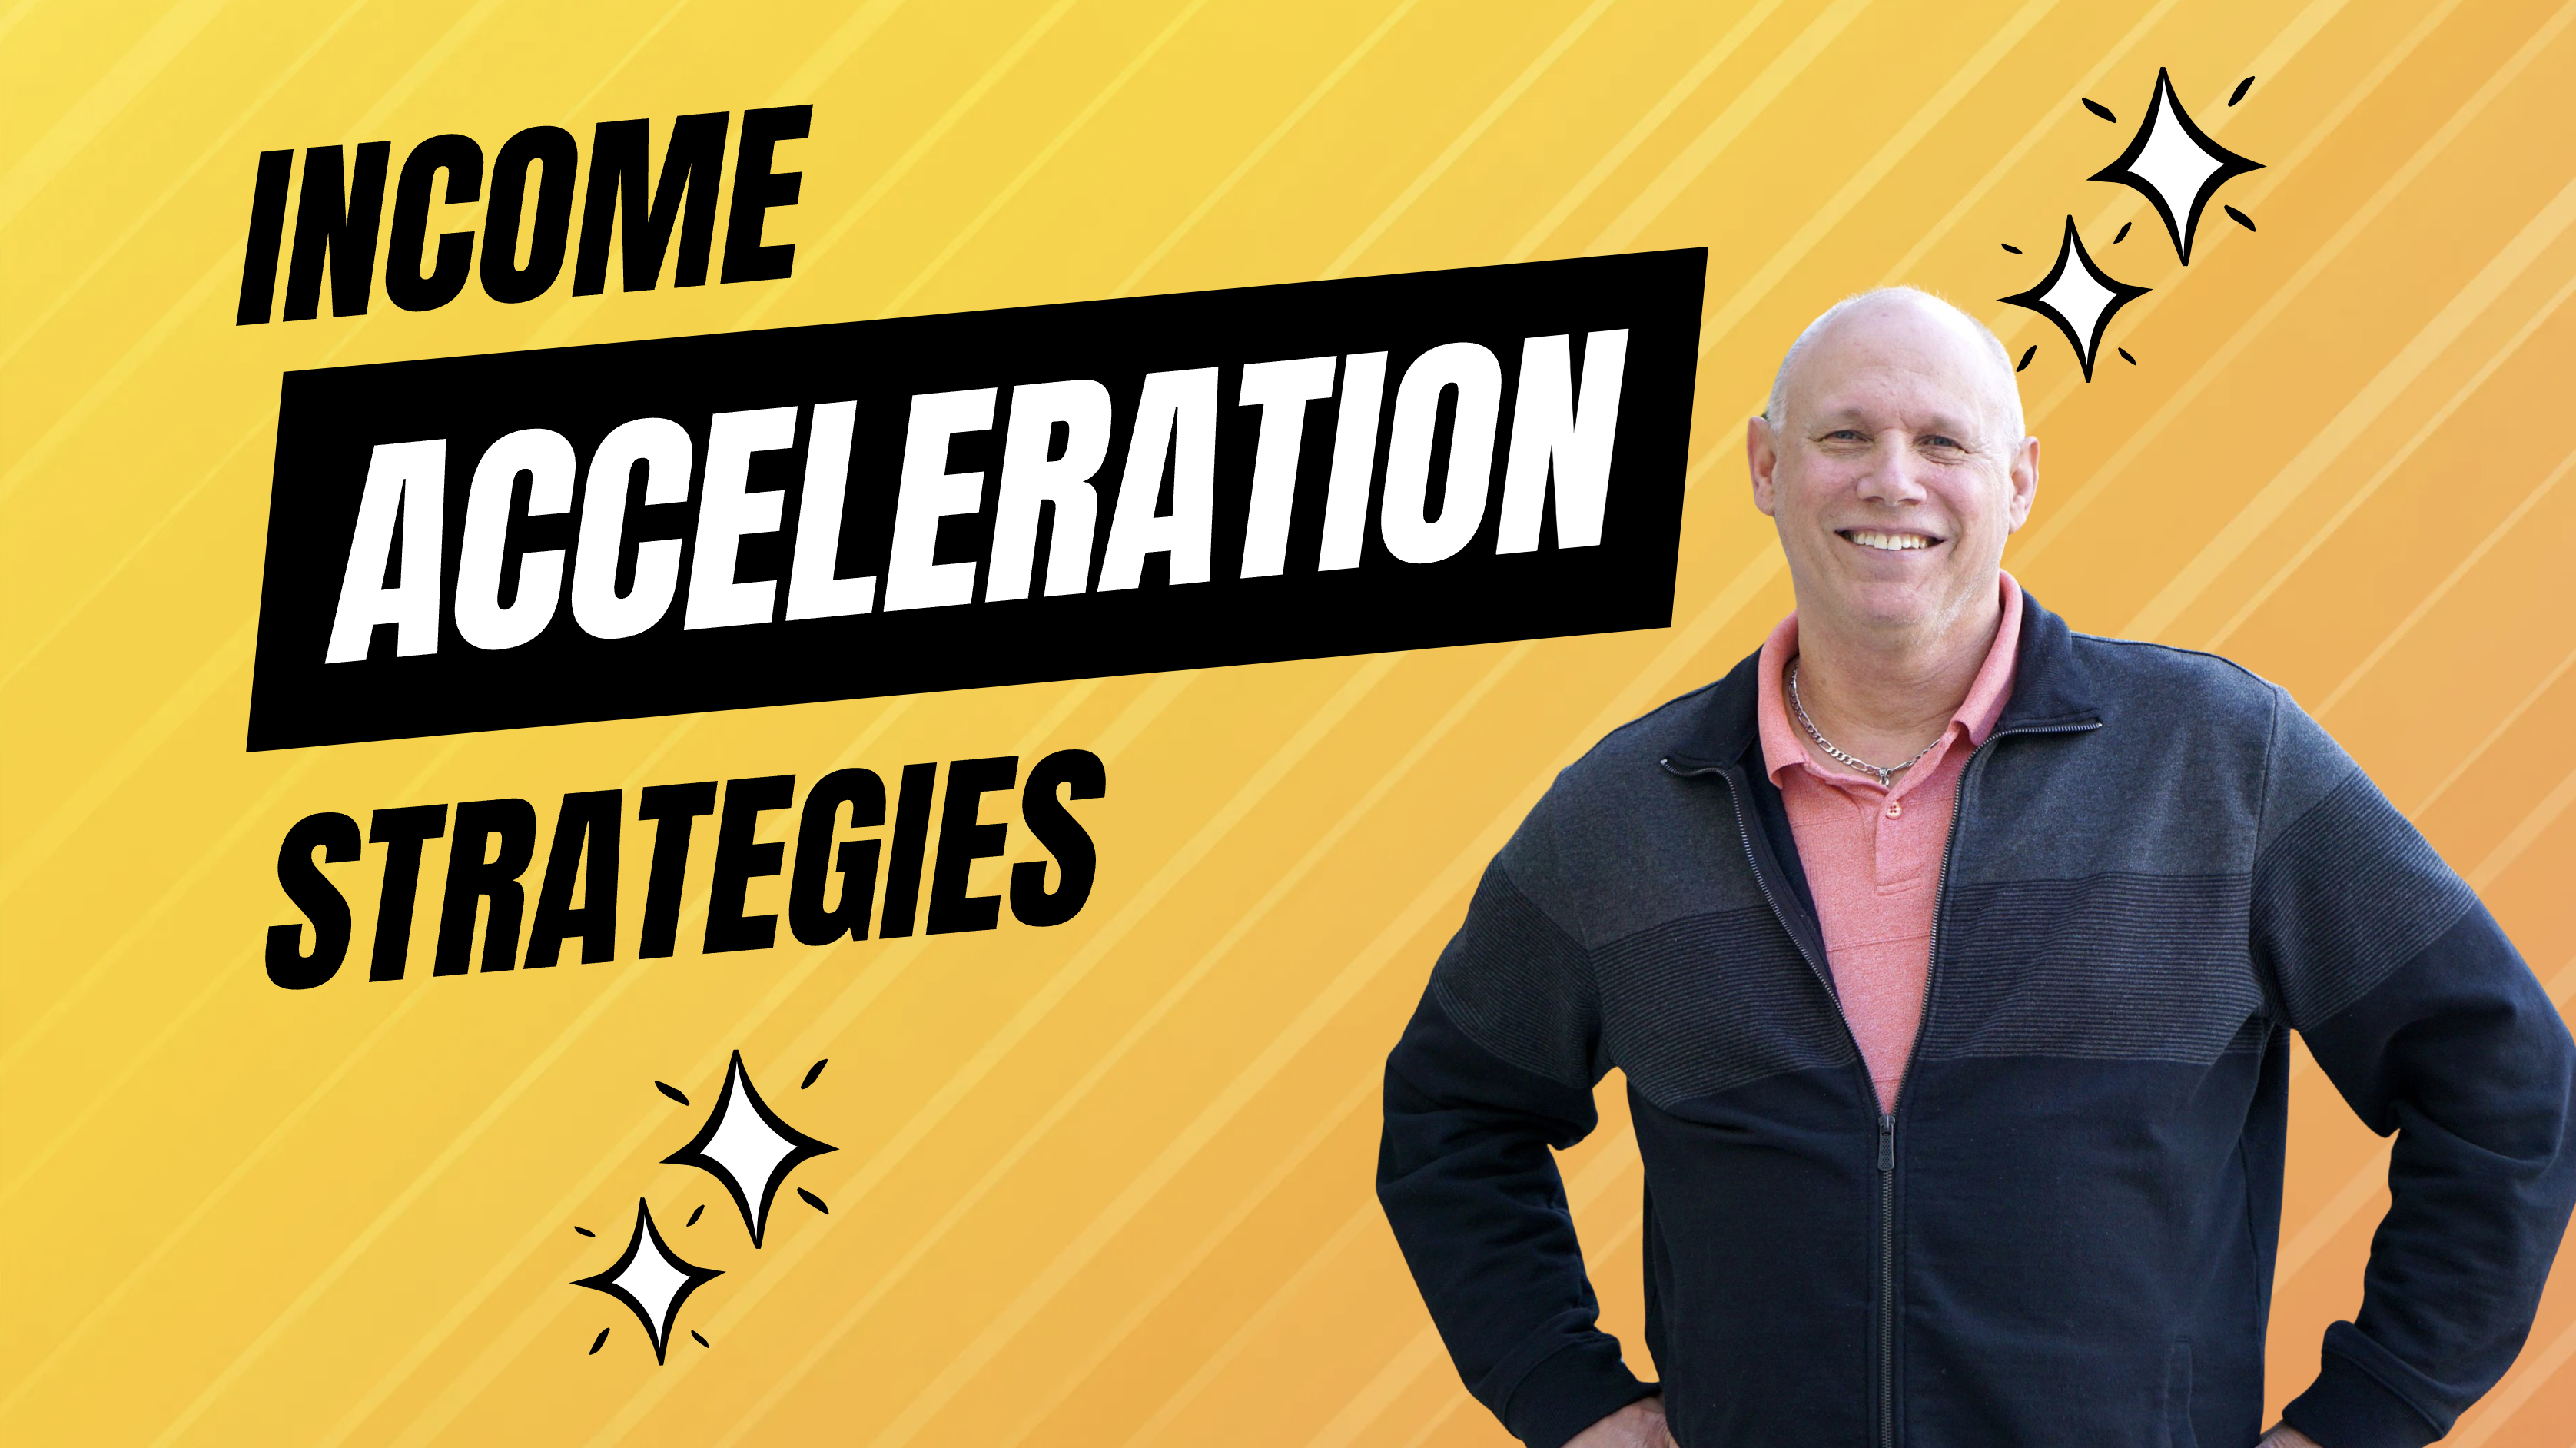 income acceleration strategies